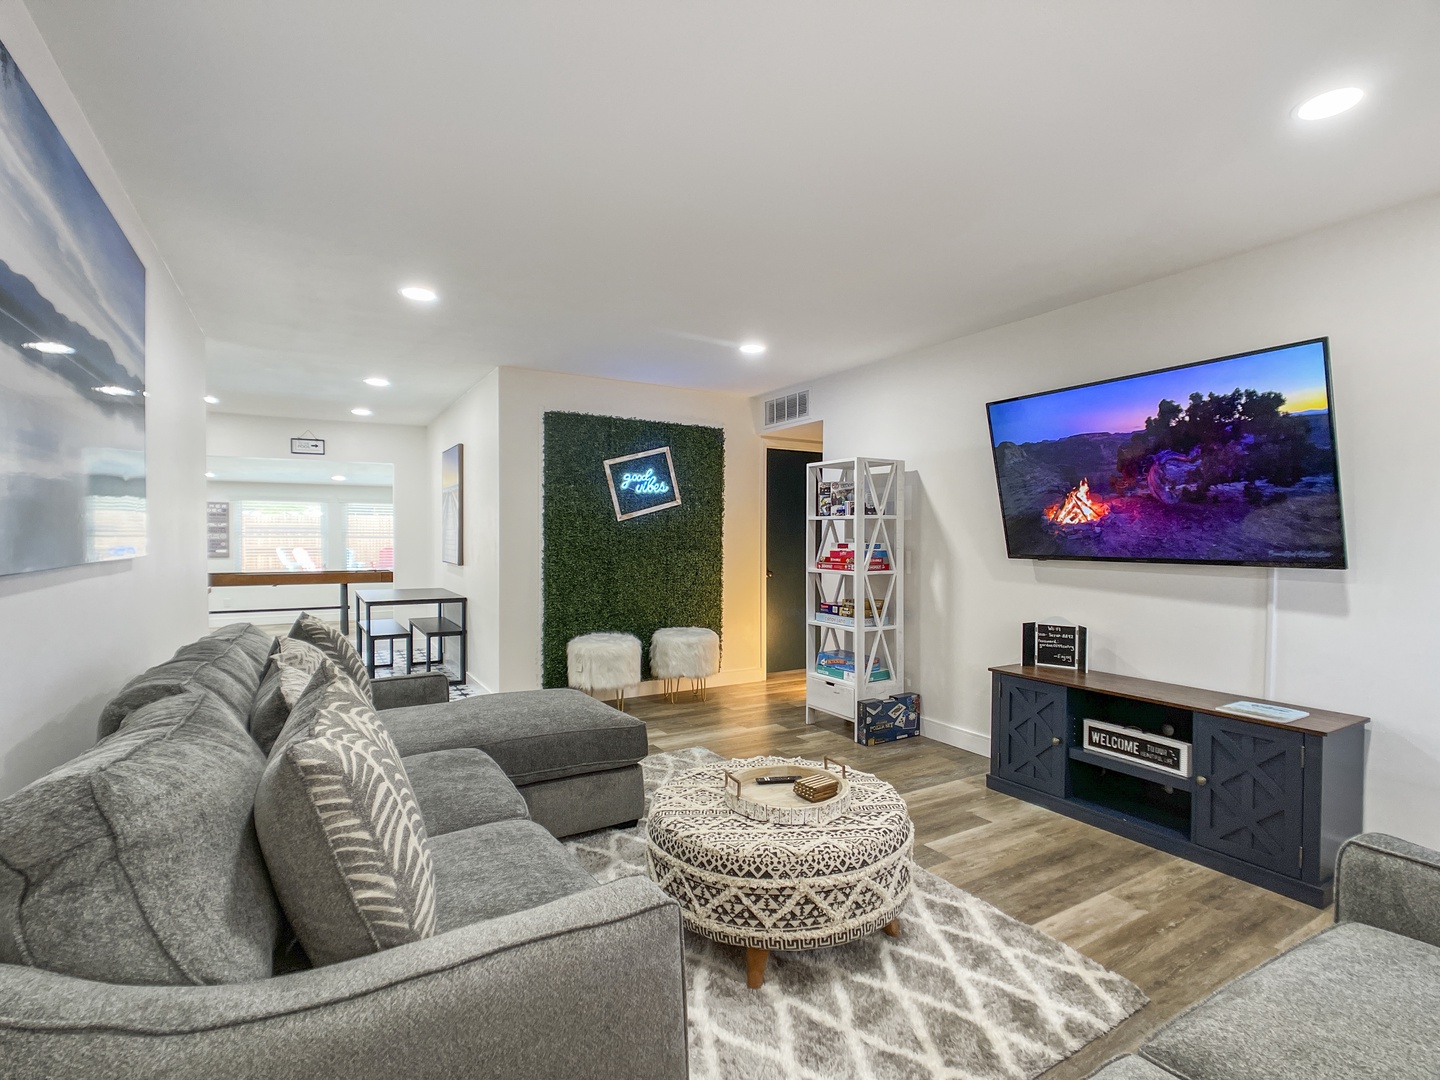 Comfortable living room with sofas, Flat screen tv connected to streaming services, foosball table, shuffleboard table, and arcade game!